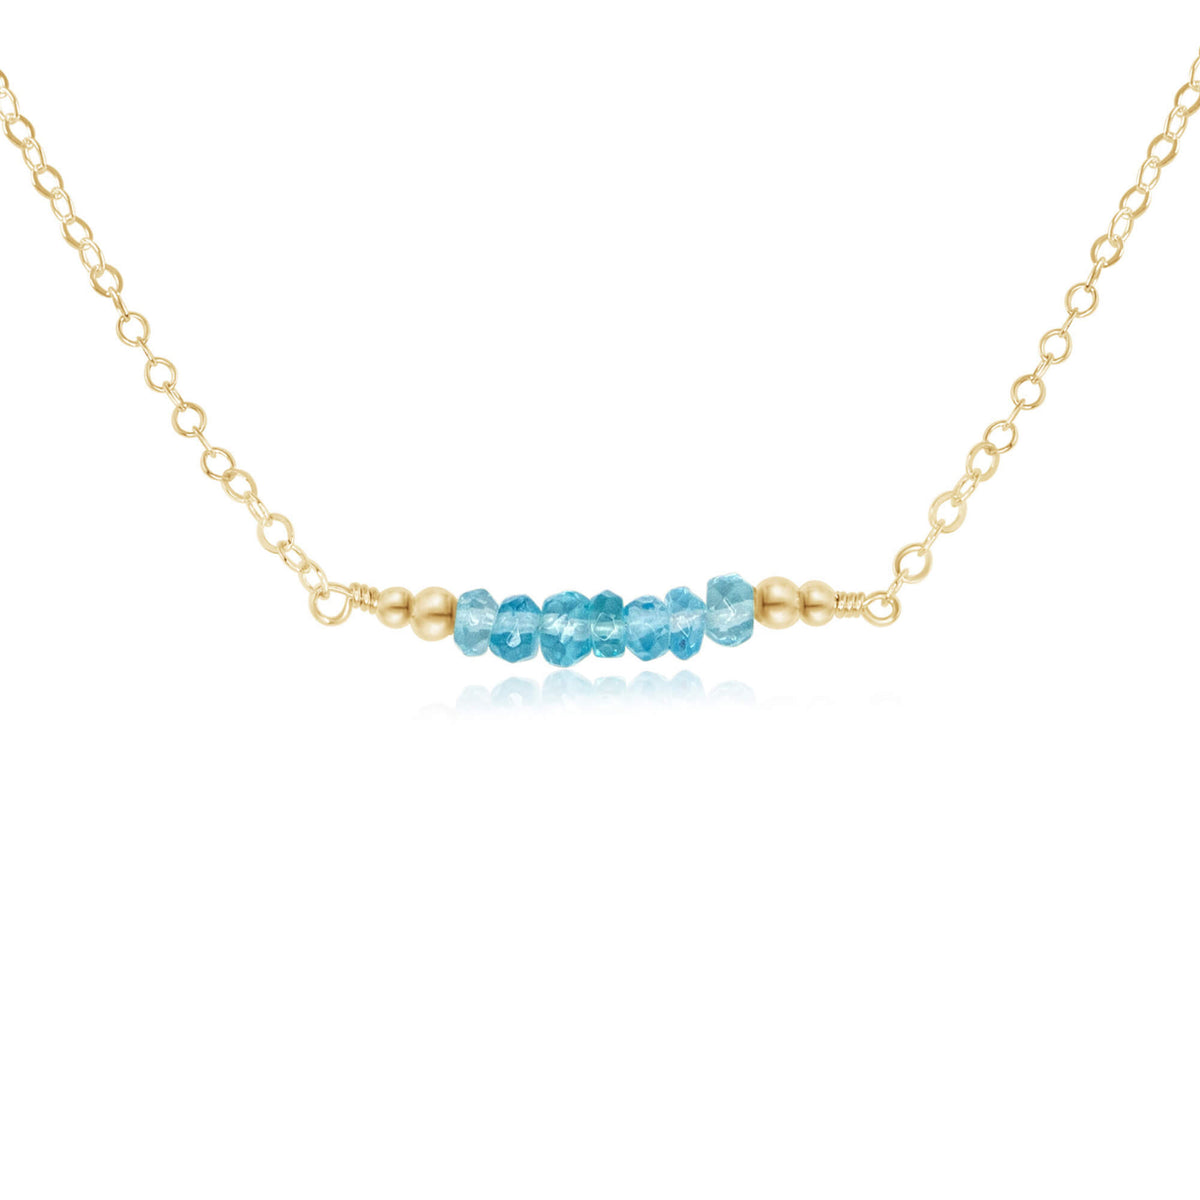 Faceted Bead Bar Necklace - Apatite - 14K Gold Fill - Luna Tide Handmade Jewellery